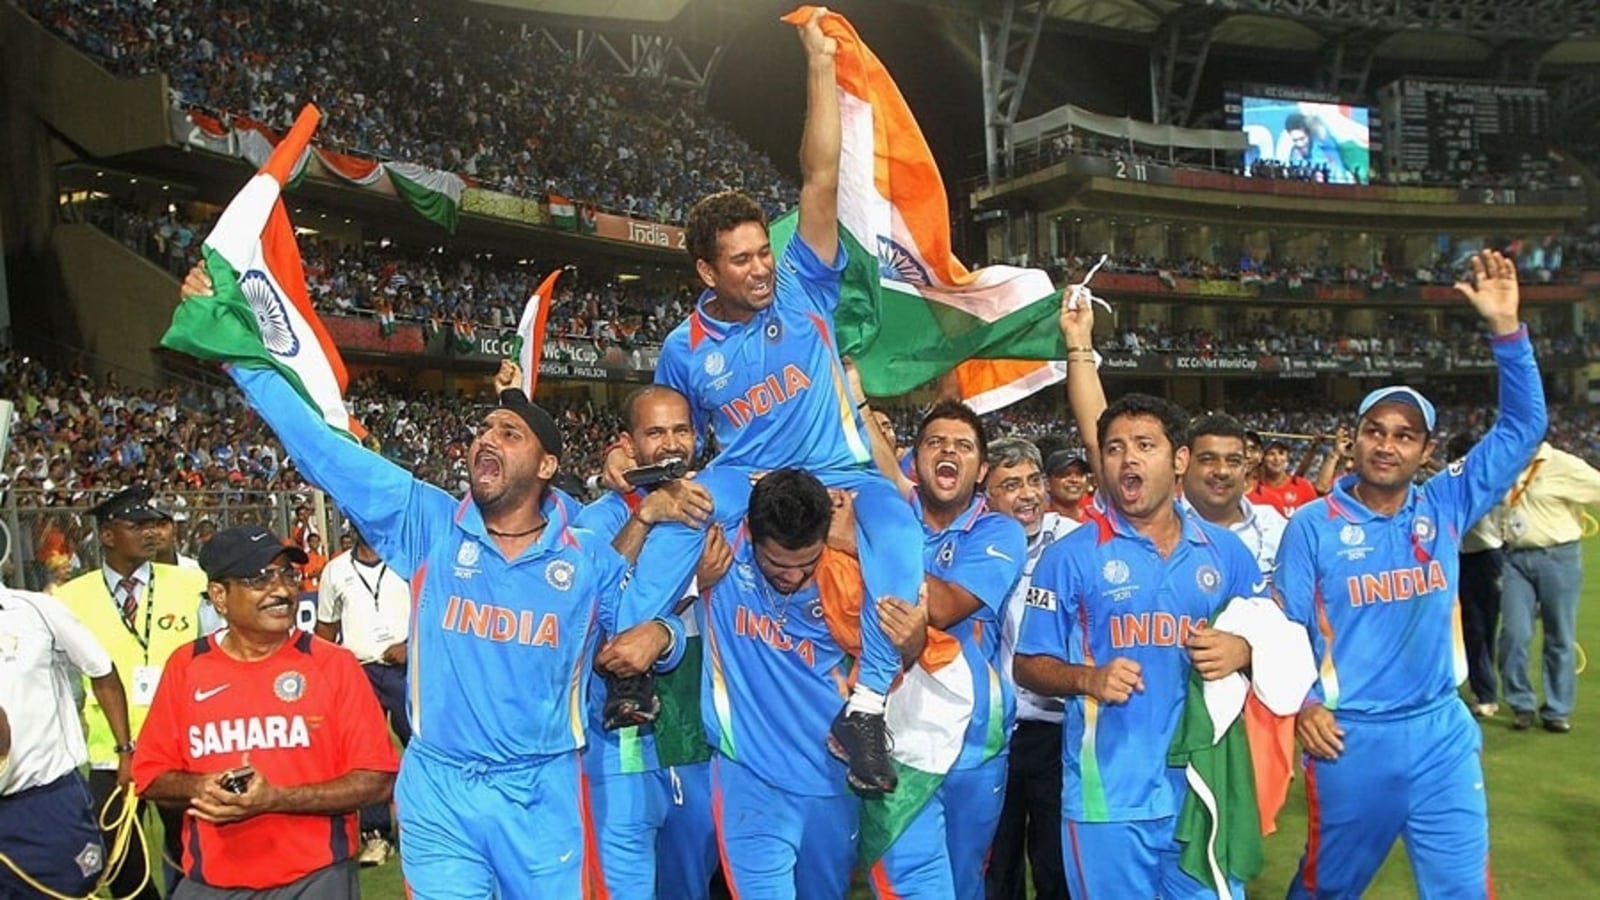 'It was not just Indian team that won World Cup, it was entire nation